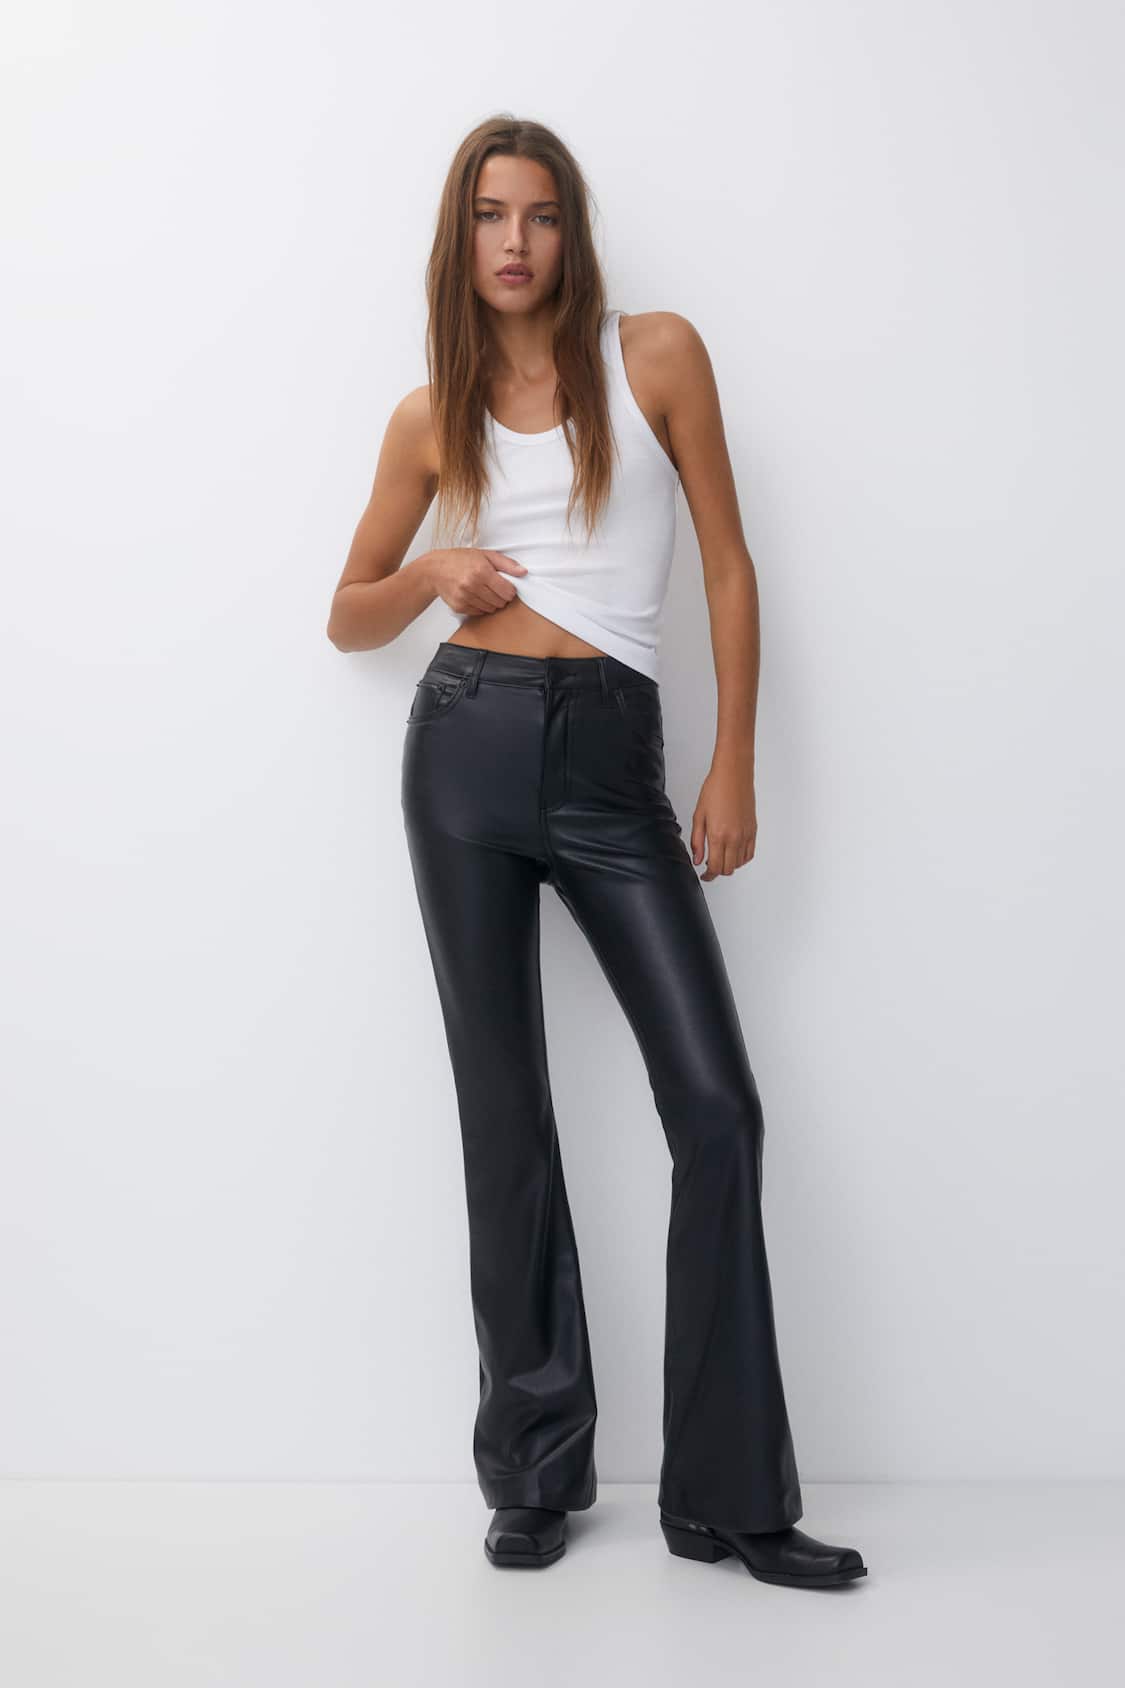 Buy Flared faux leather trousers Online in Dubai & the UAE